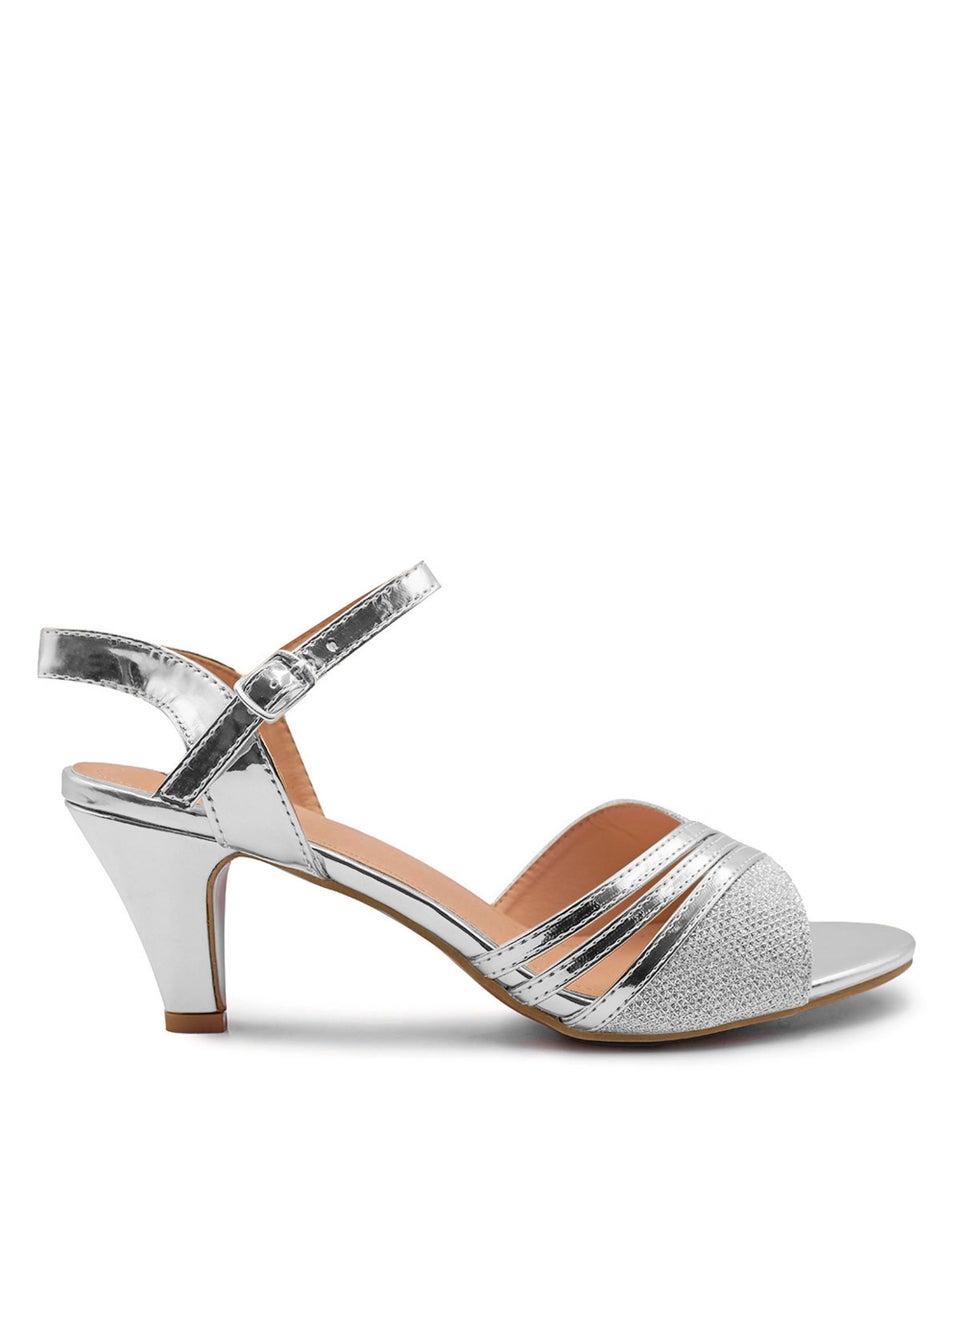 Where's That From Stormi Low Heel Sandals In Silver Glitter